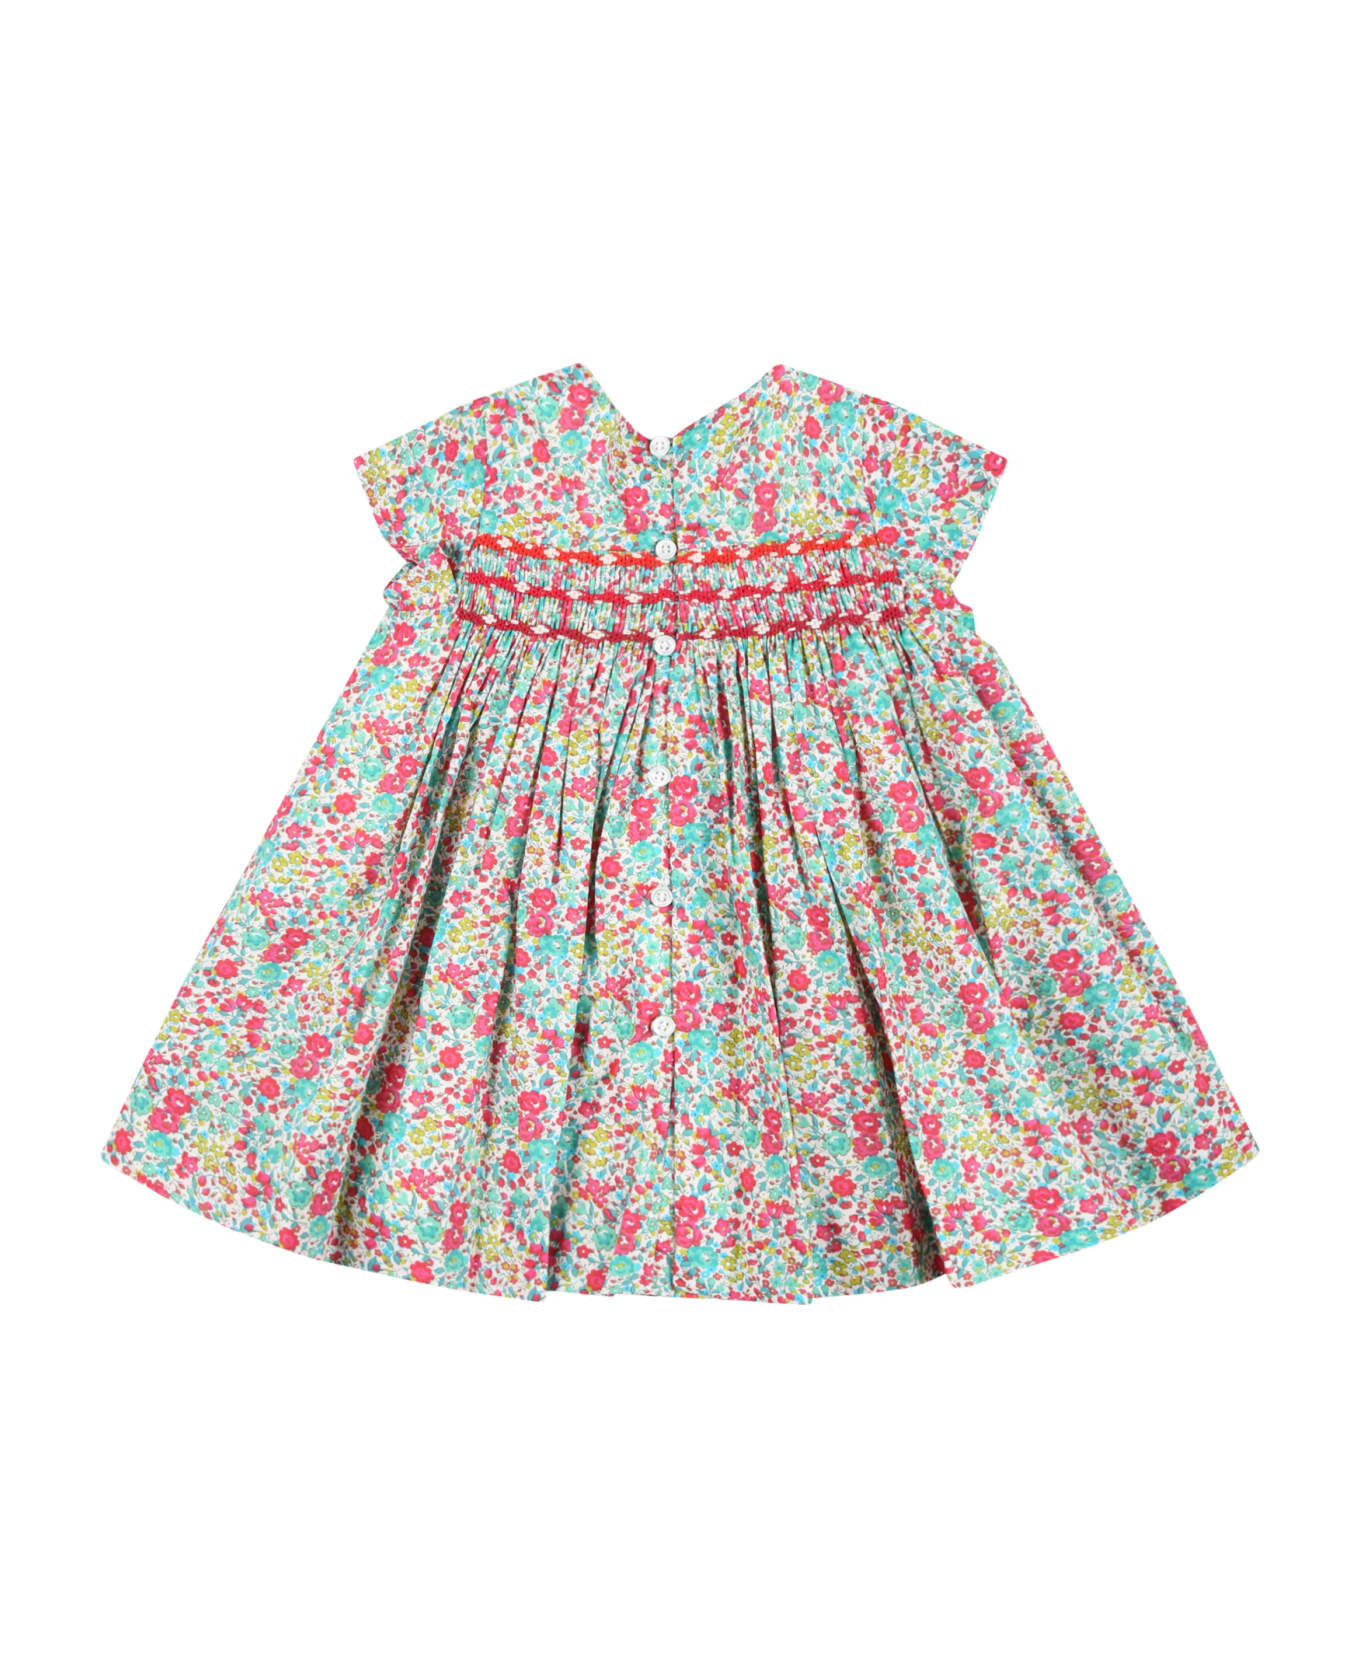 Bonpoint Multicolor Dress For Baby Girl With Liberty Print - Multicolor